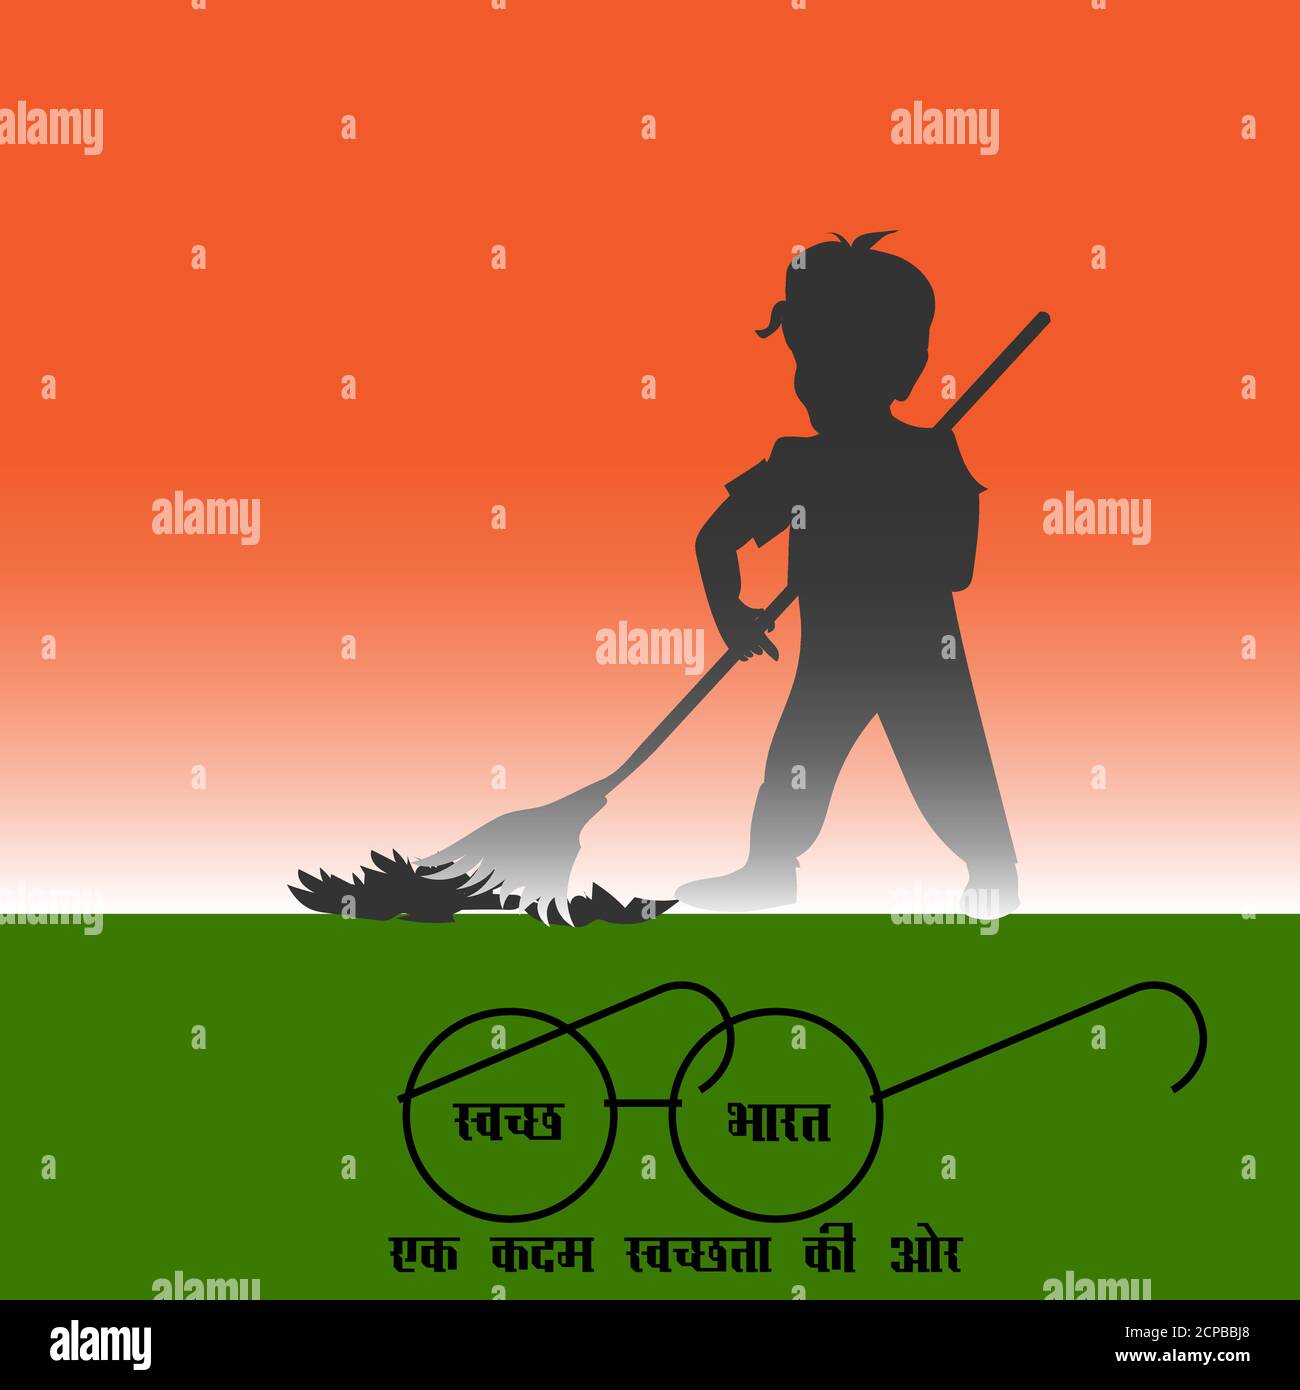 Clean India is the English meaning of Swachh Bharat writtten in ...